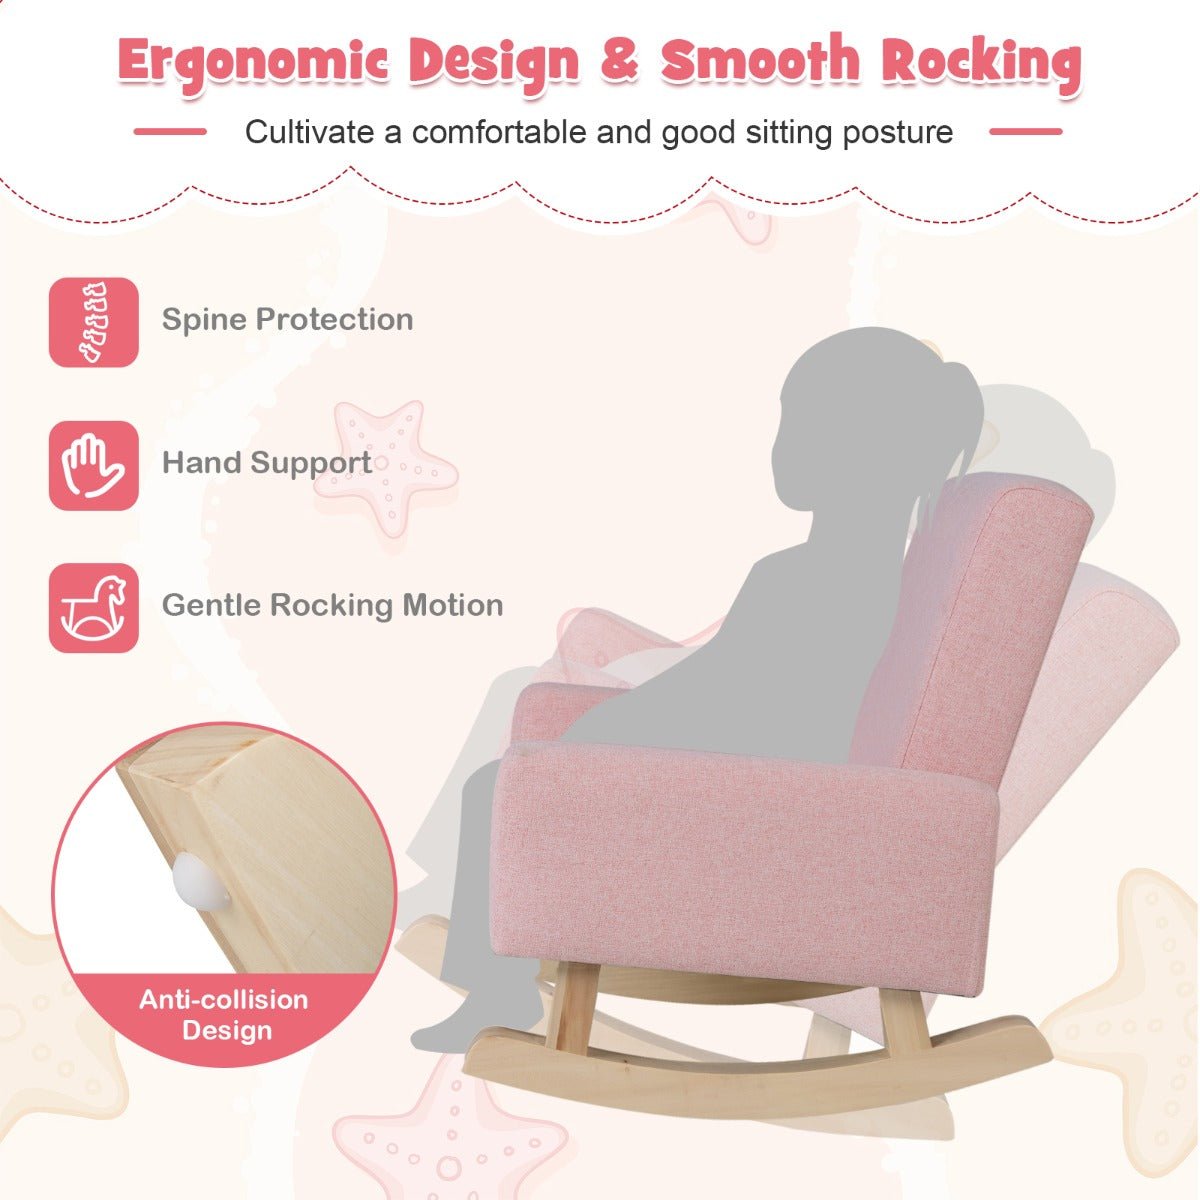  Kids Rocking Chair - Pink, Wood Legs, Anti-tipping Design for Relaxing Play